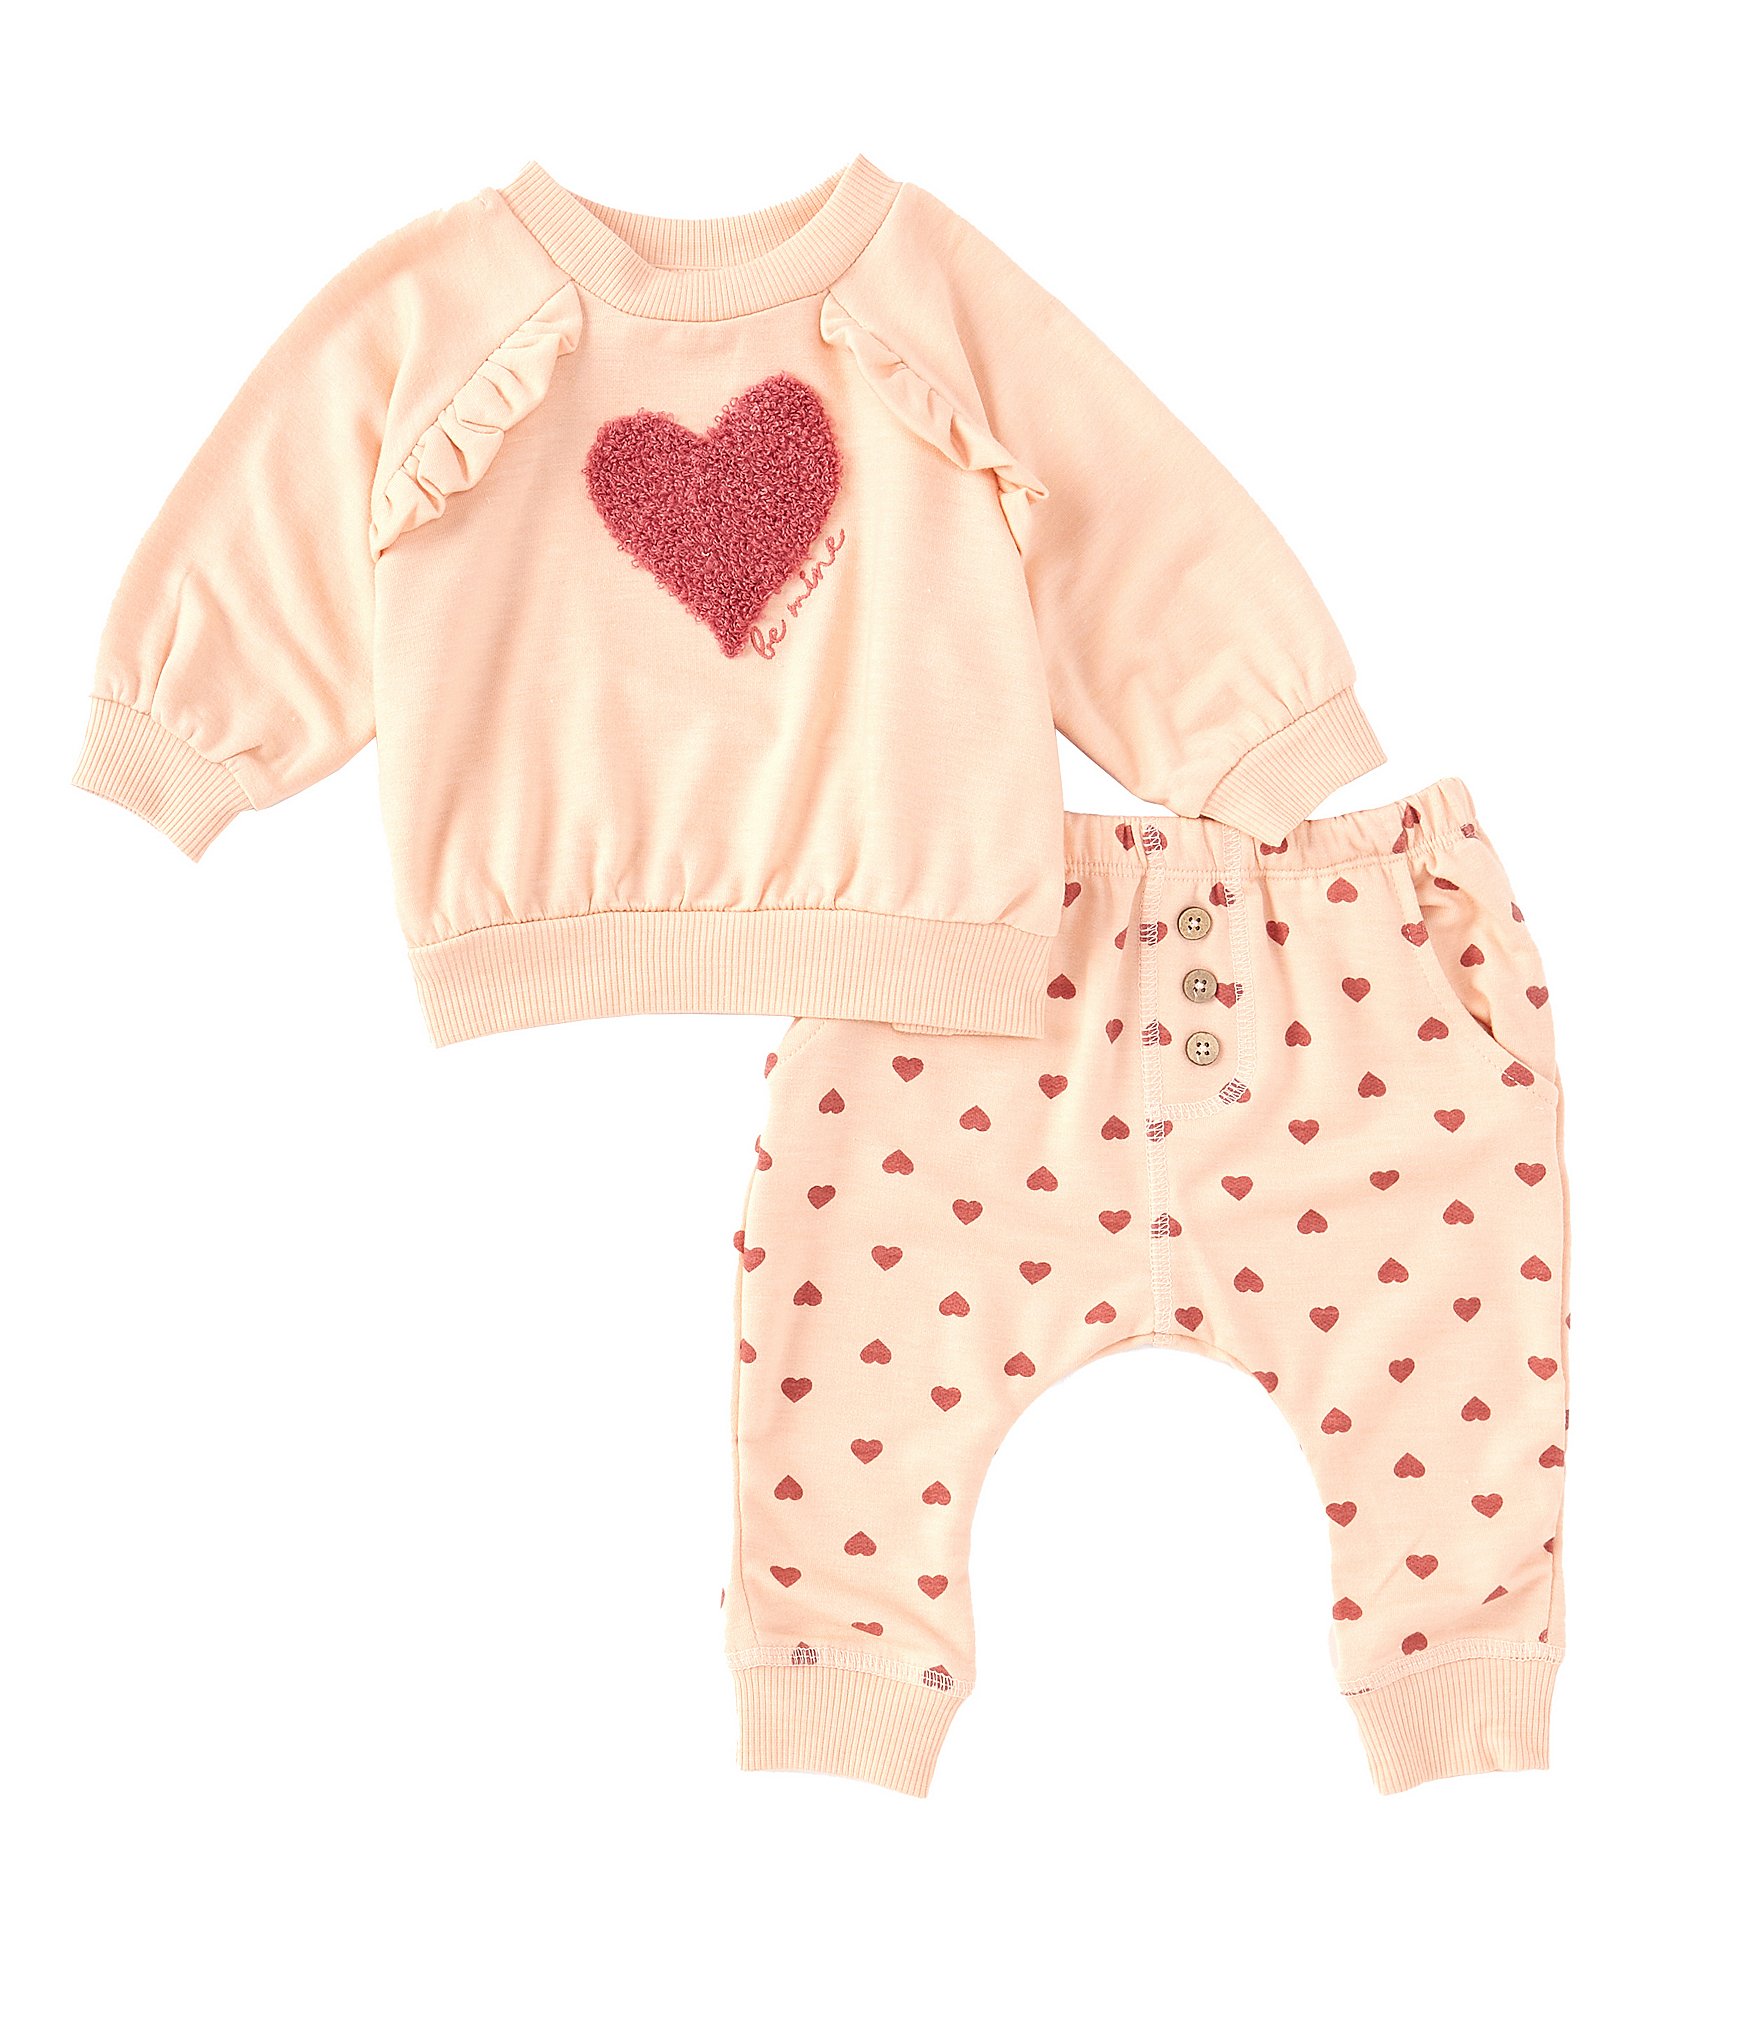 Jessica Simpson Baby essentials 2 Piece Sweater and Pants Set